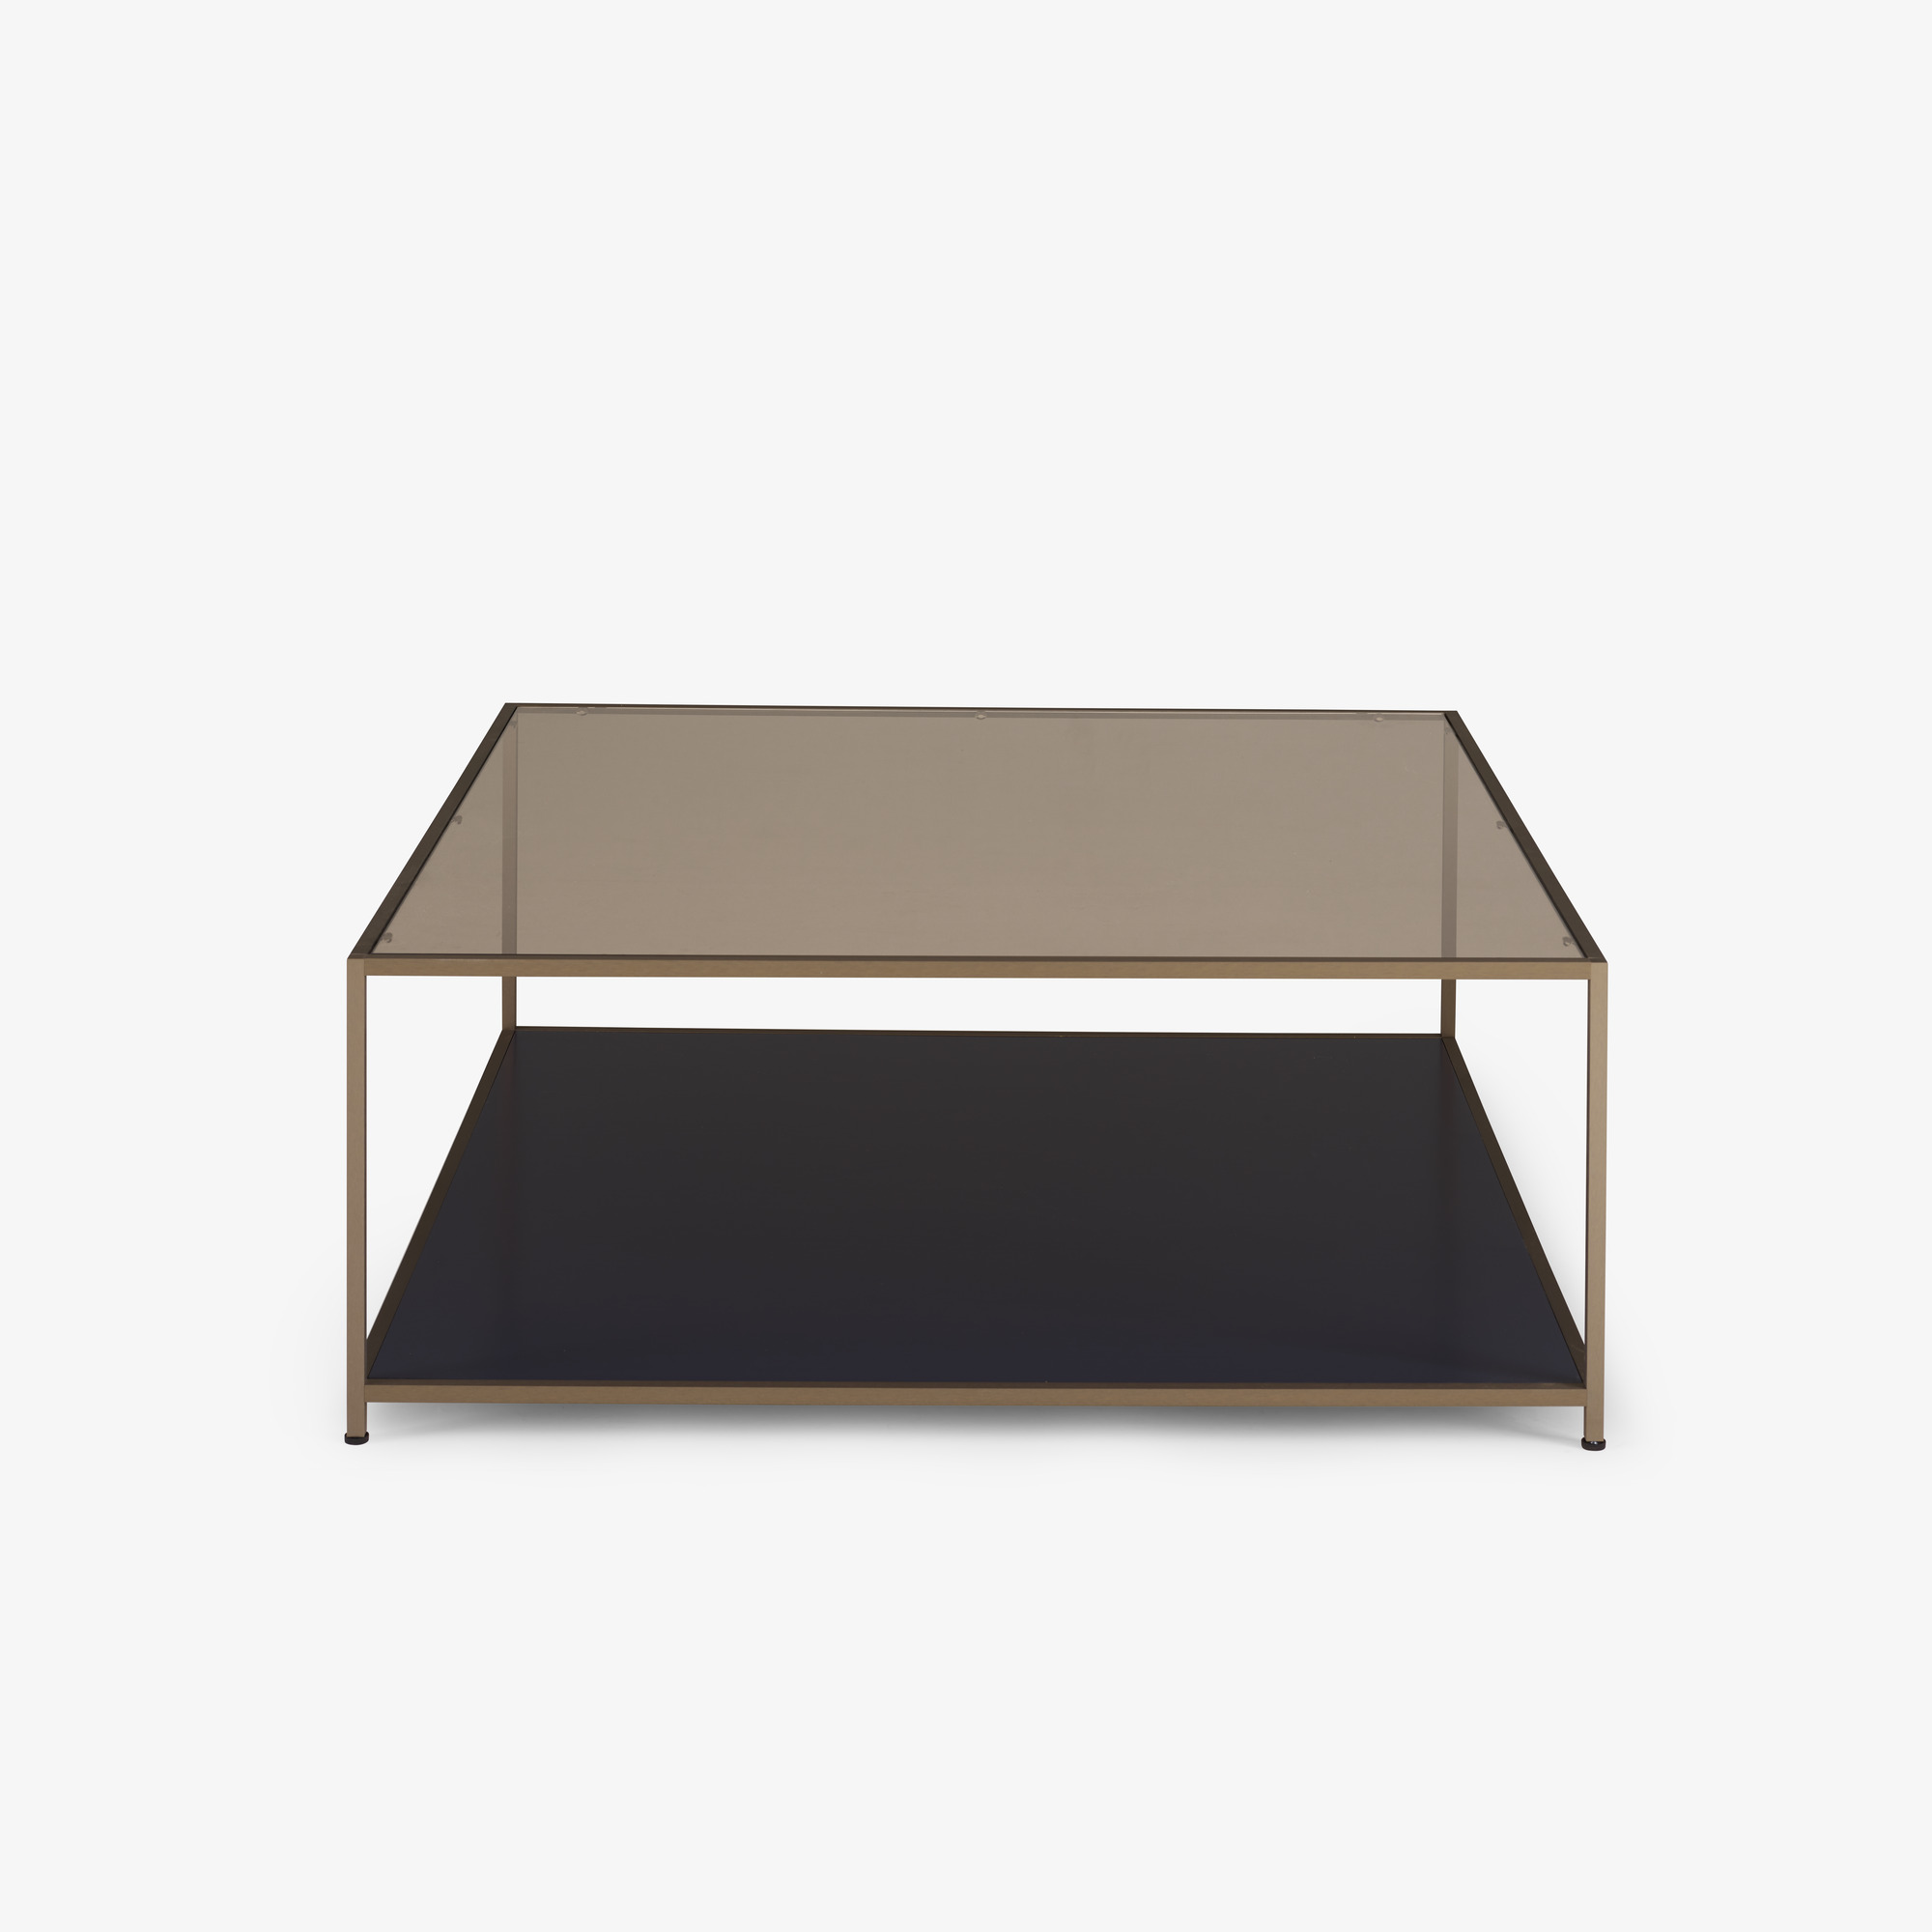 Image Square low table 1